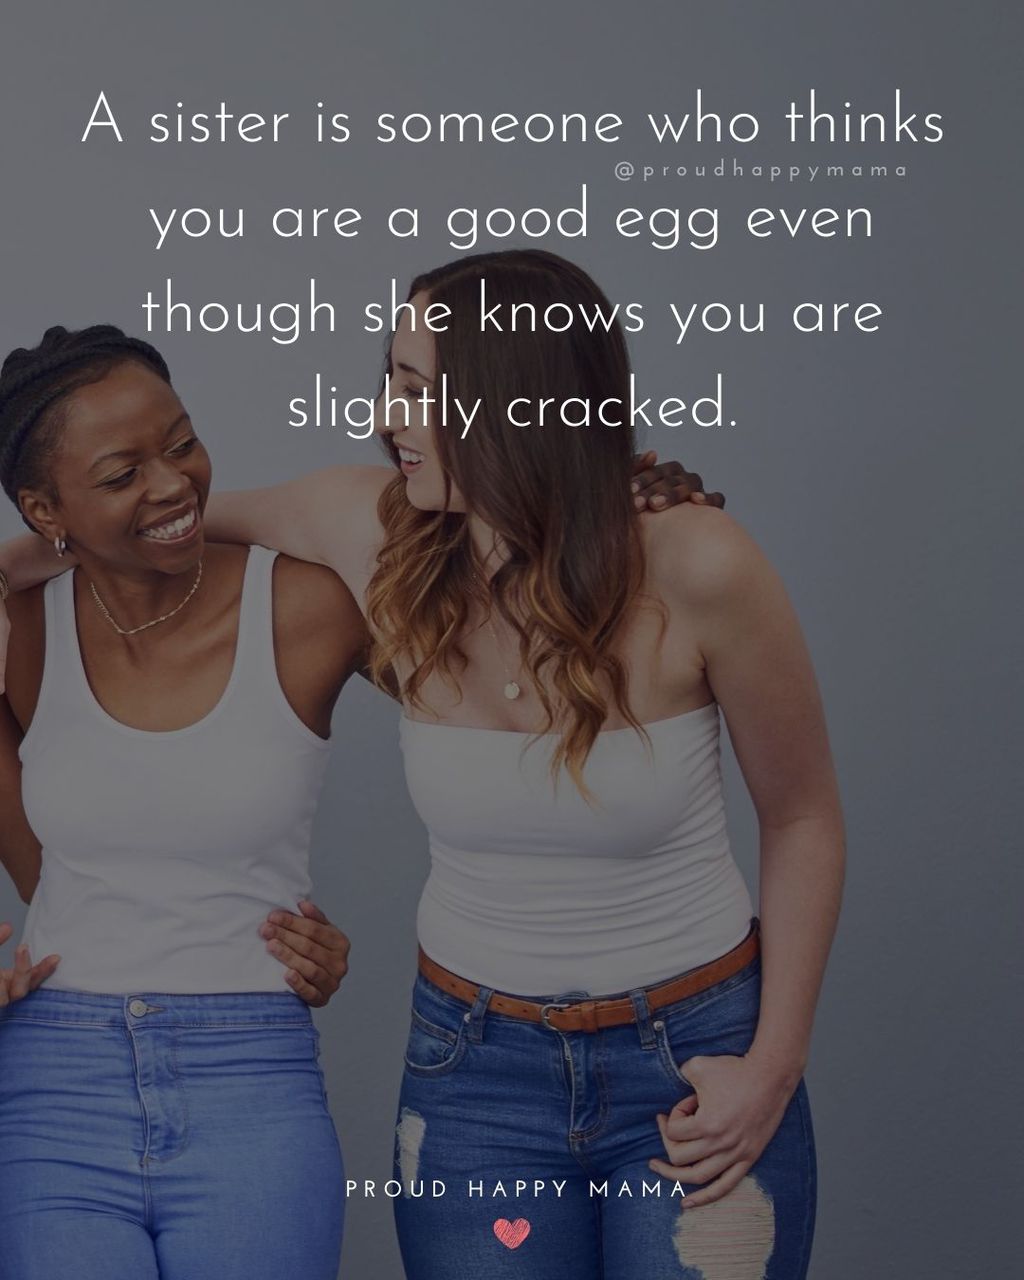 Sister Quotes - A sister is someone who thinks you are a good egg even though she knows you are slightly cracked.